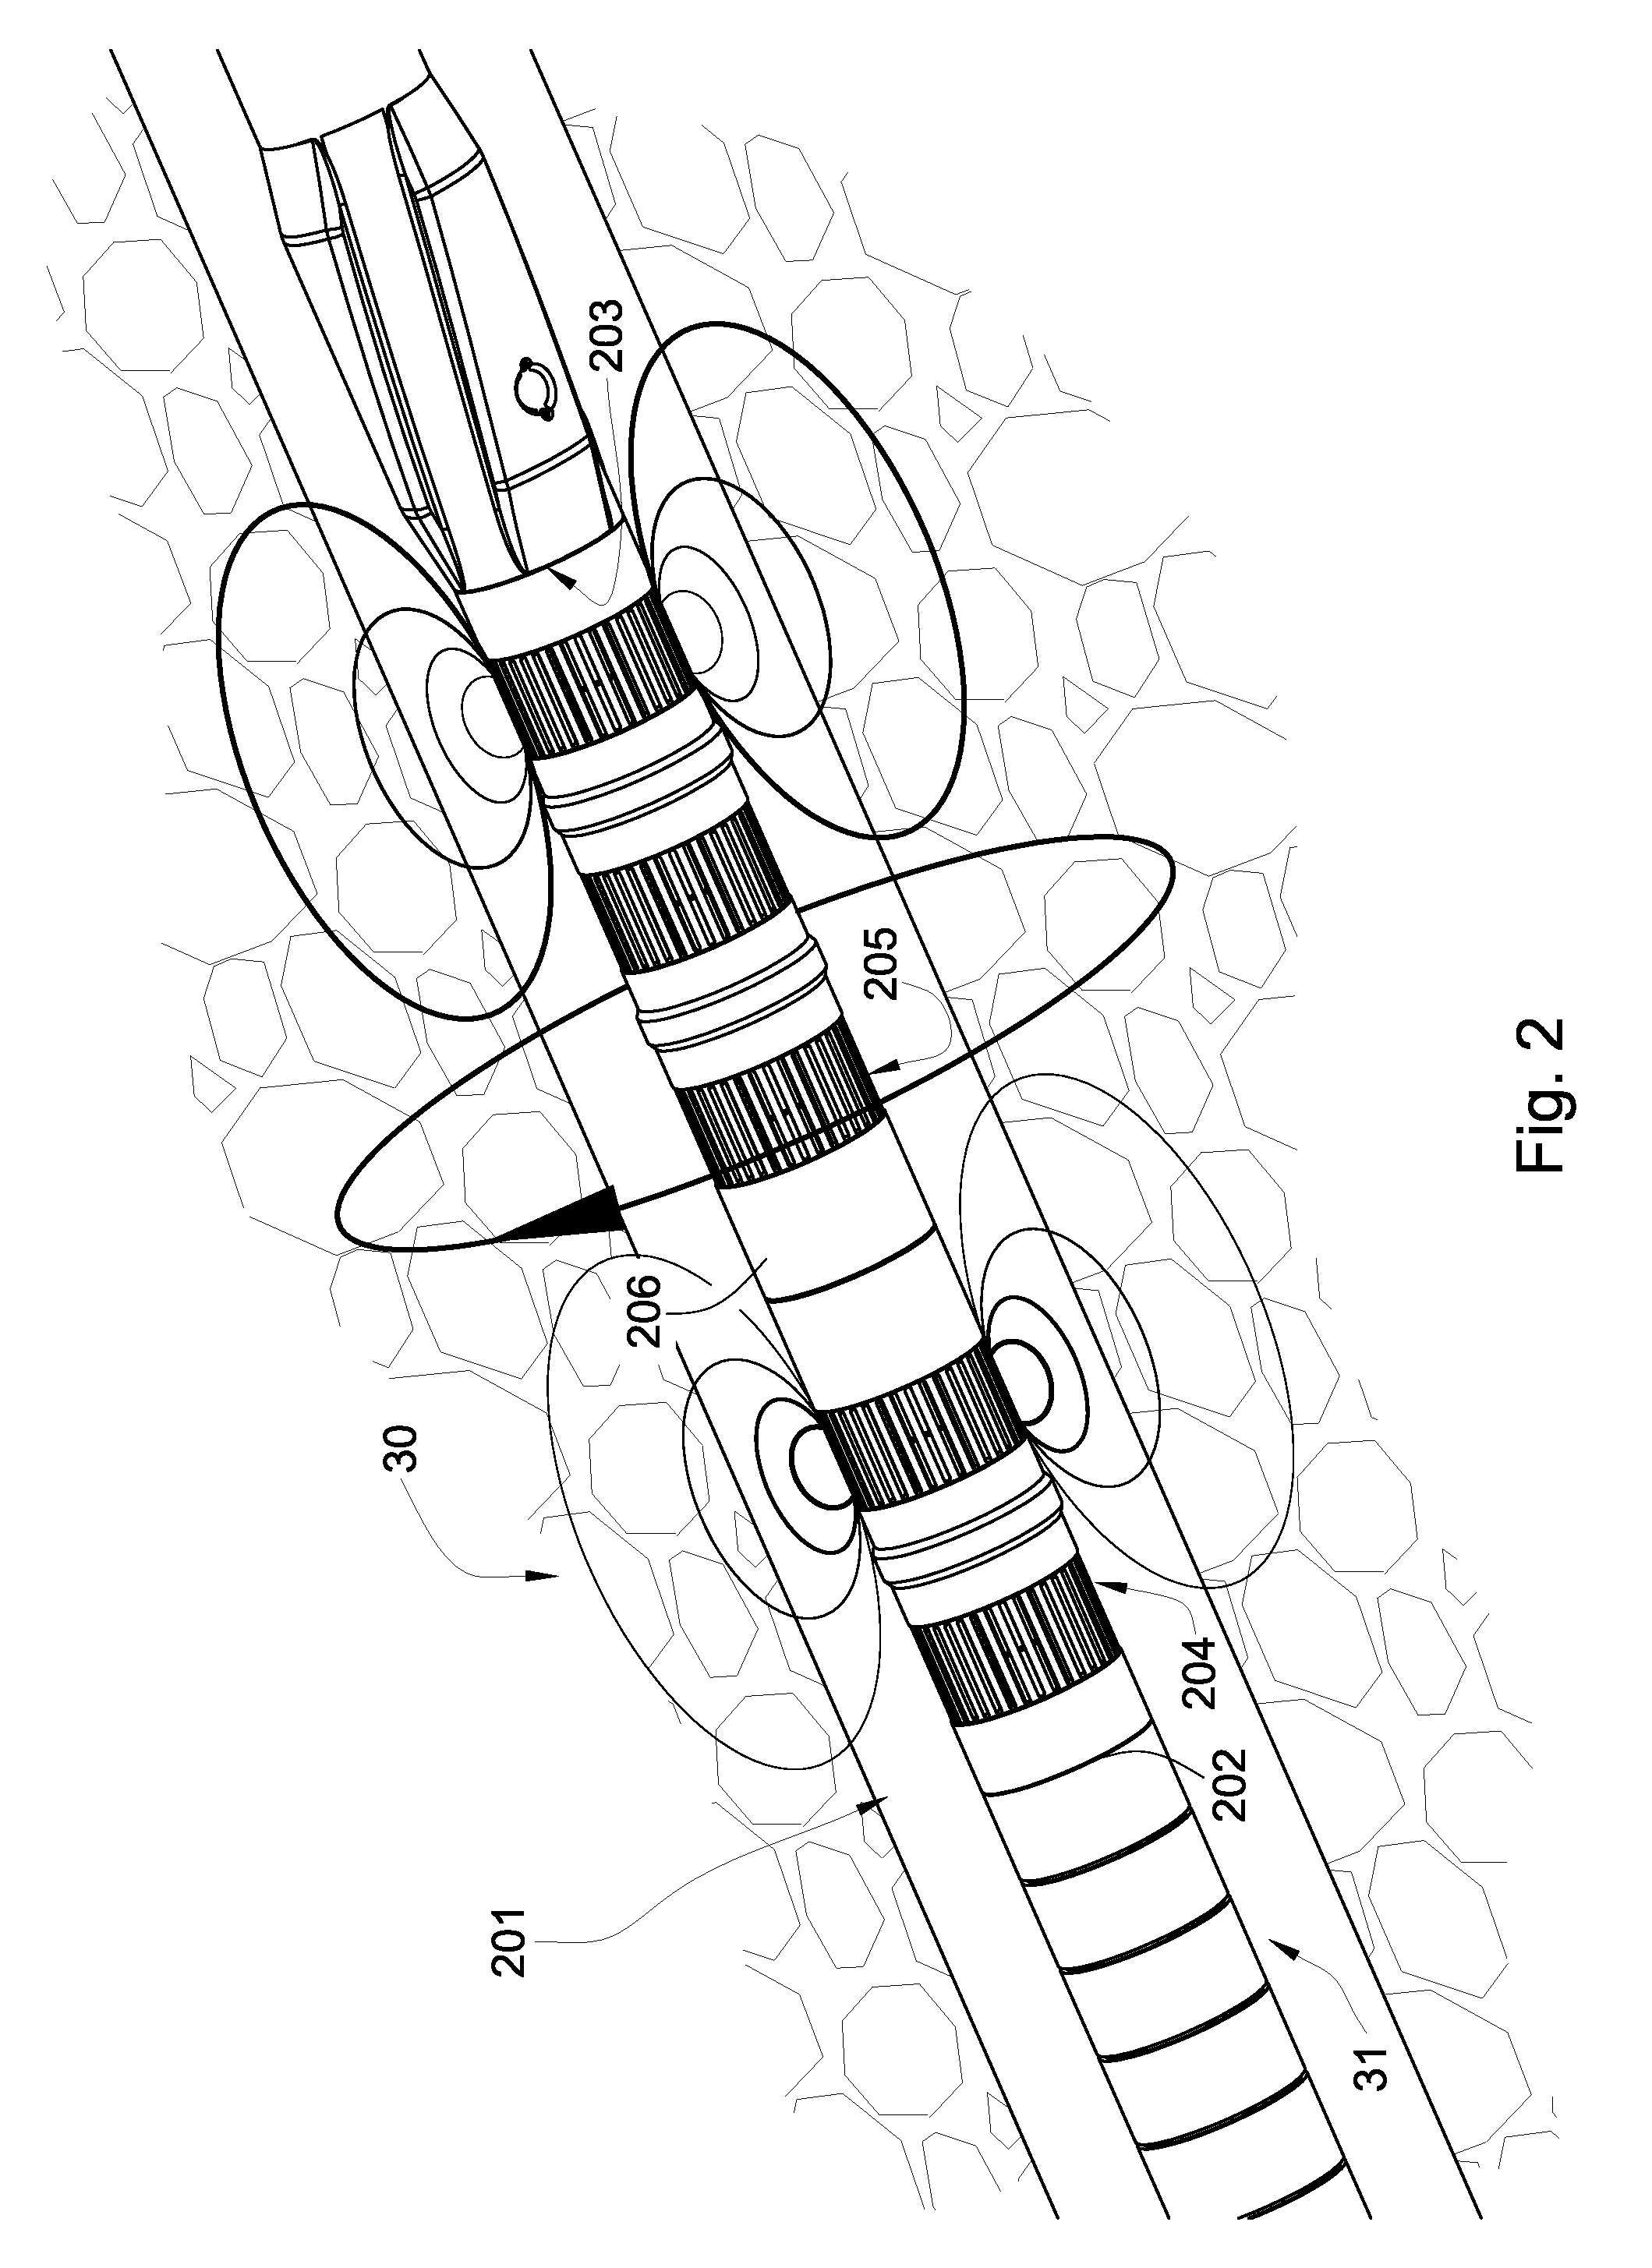 Multiple frequency inductive resistivity device